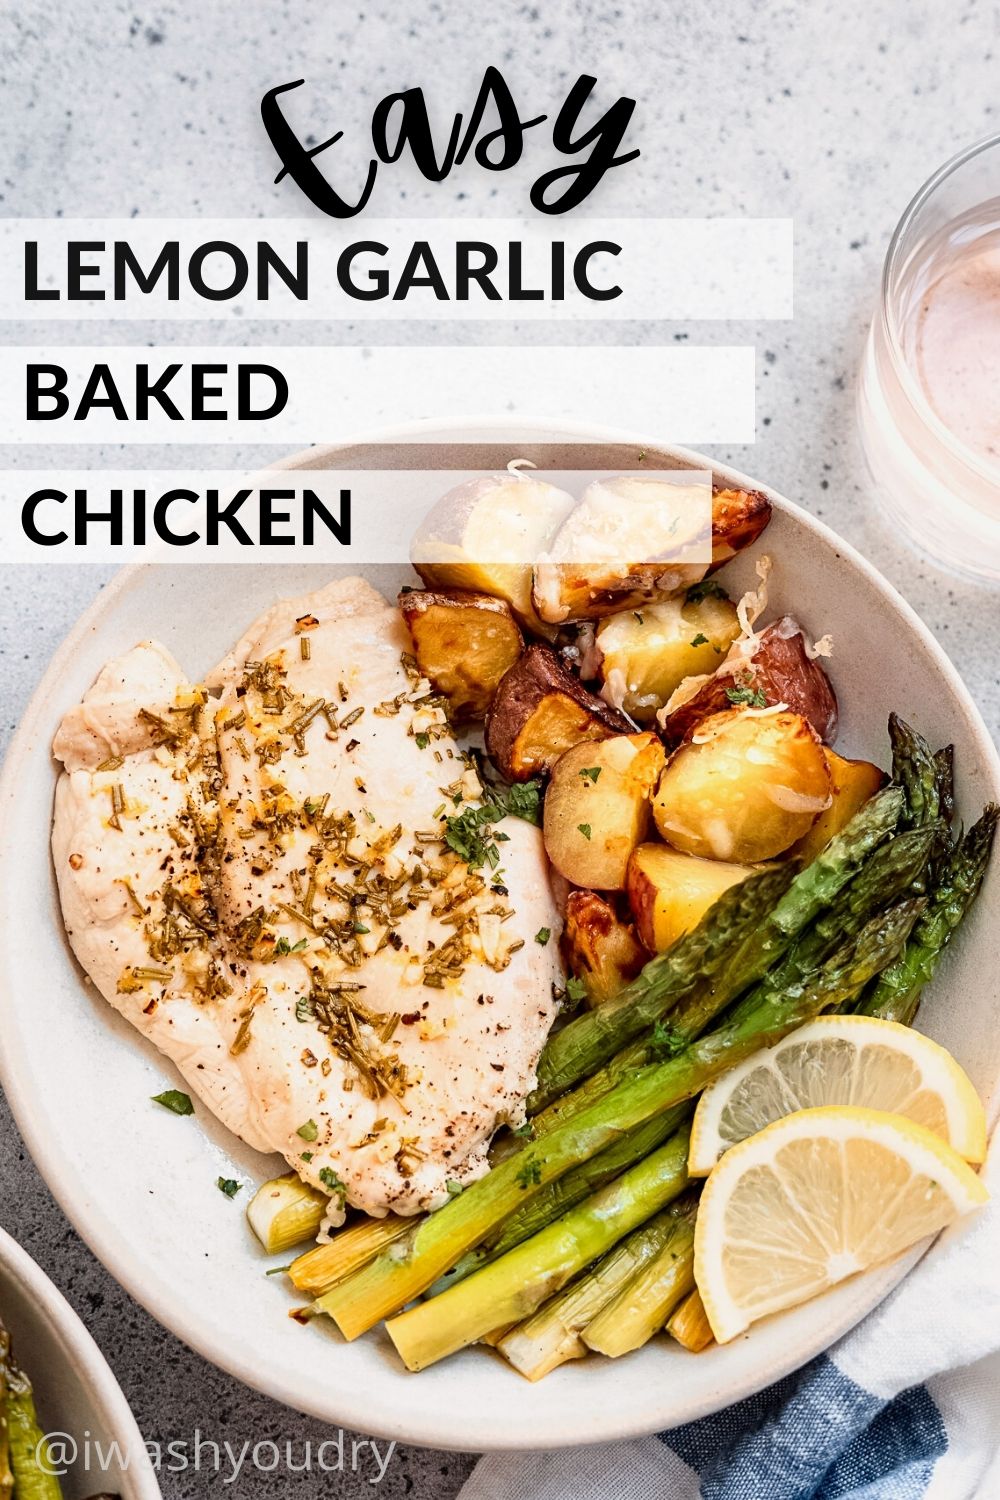 Cooked Lemon Garlic baked chicken with potatoes, asparagus, and lemon wedges on white plate.